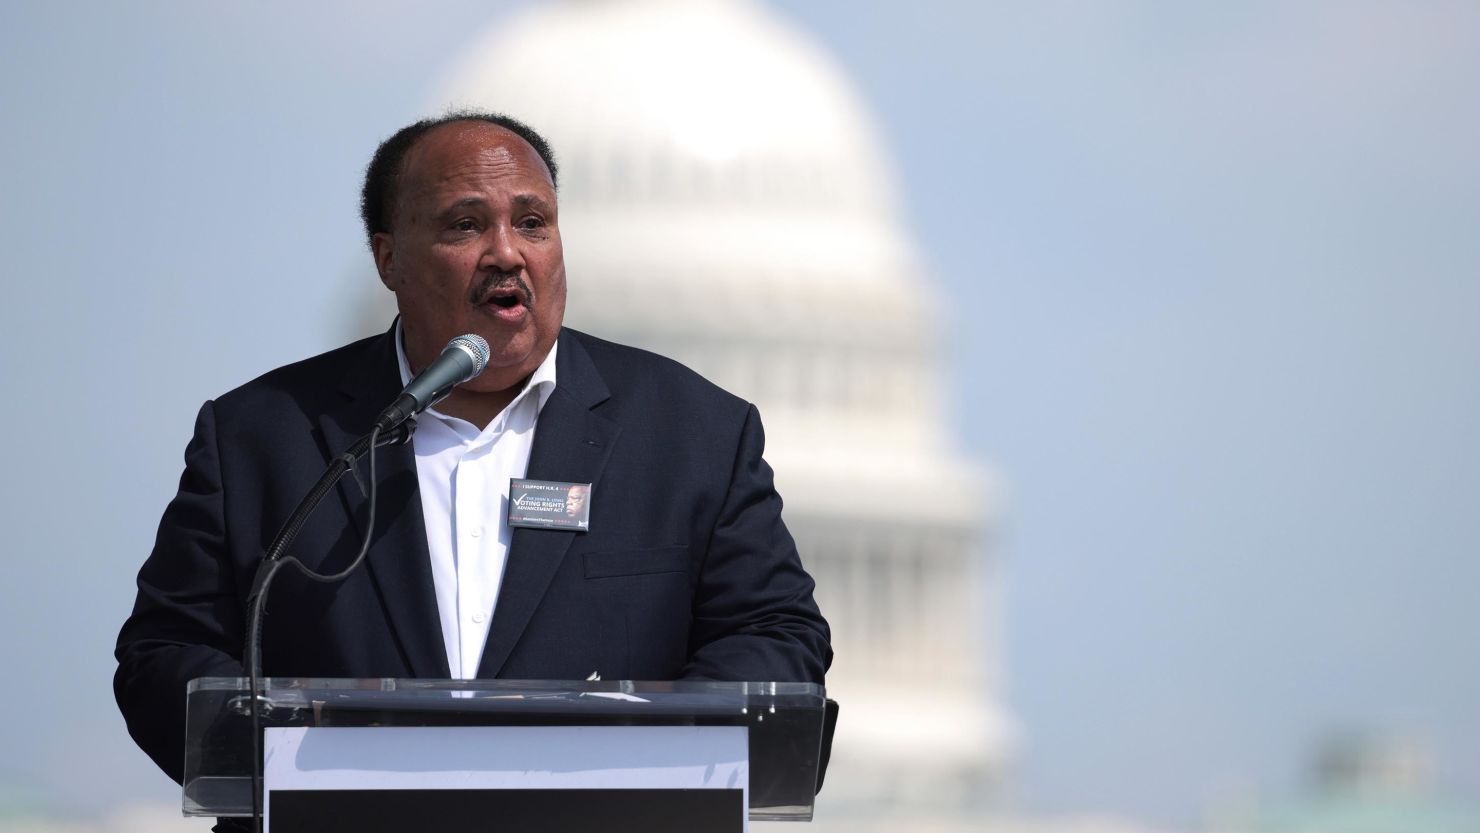 Martin Luther King III speaks during the "March On for Washington and Voting Rights" on the National Mall on August 28, 2021 in Washington, DC. 